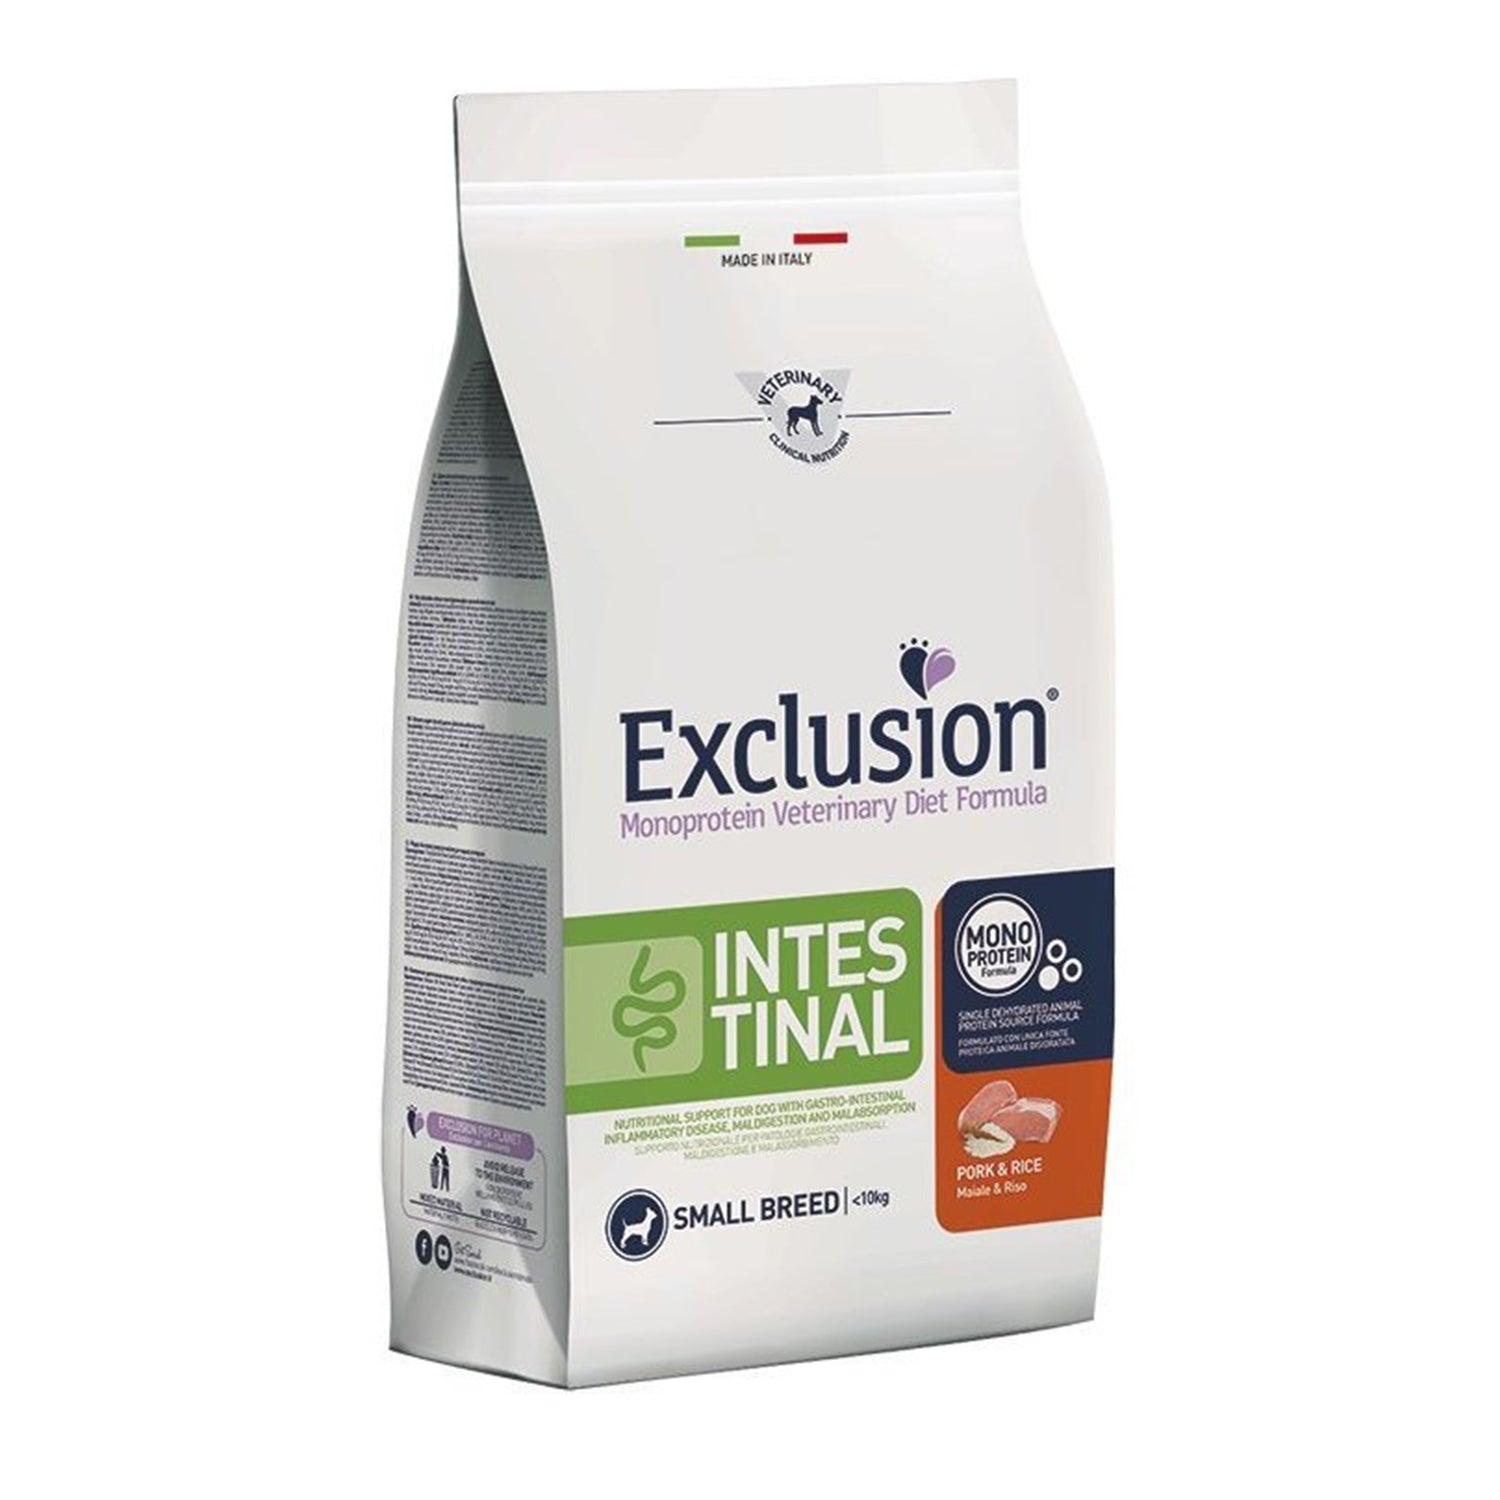 Exclusion diet dog 2kg adult small breed intestinal pork&rice